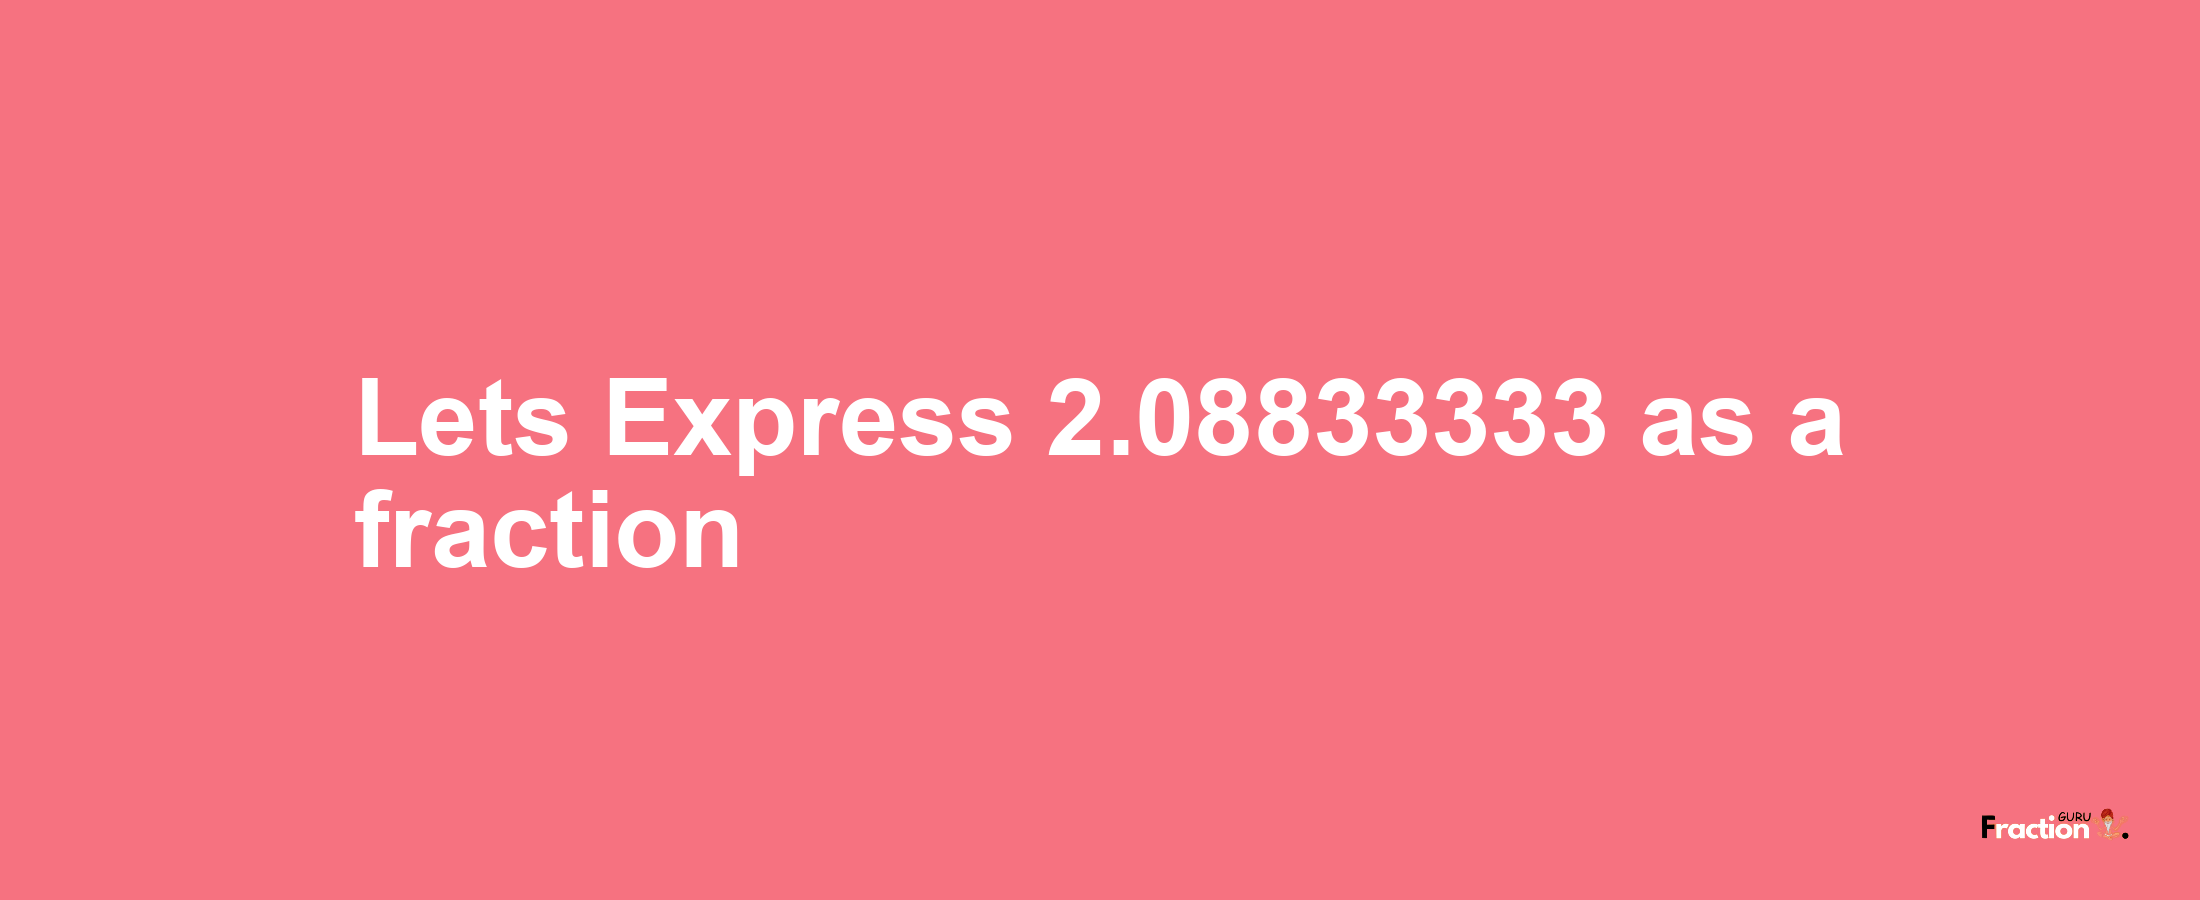 Lets Express 2.08833333 as afraction